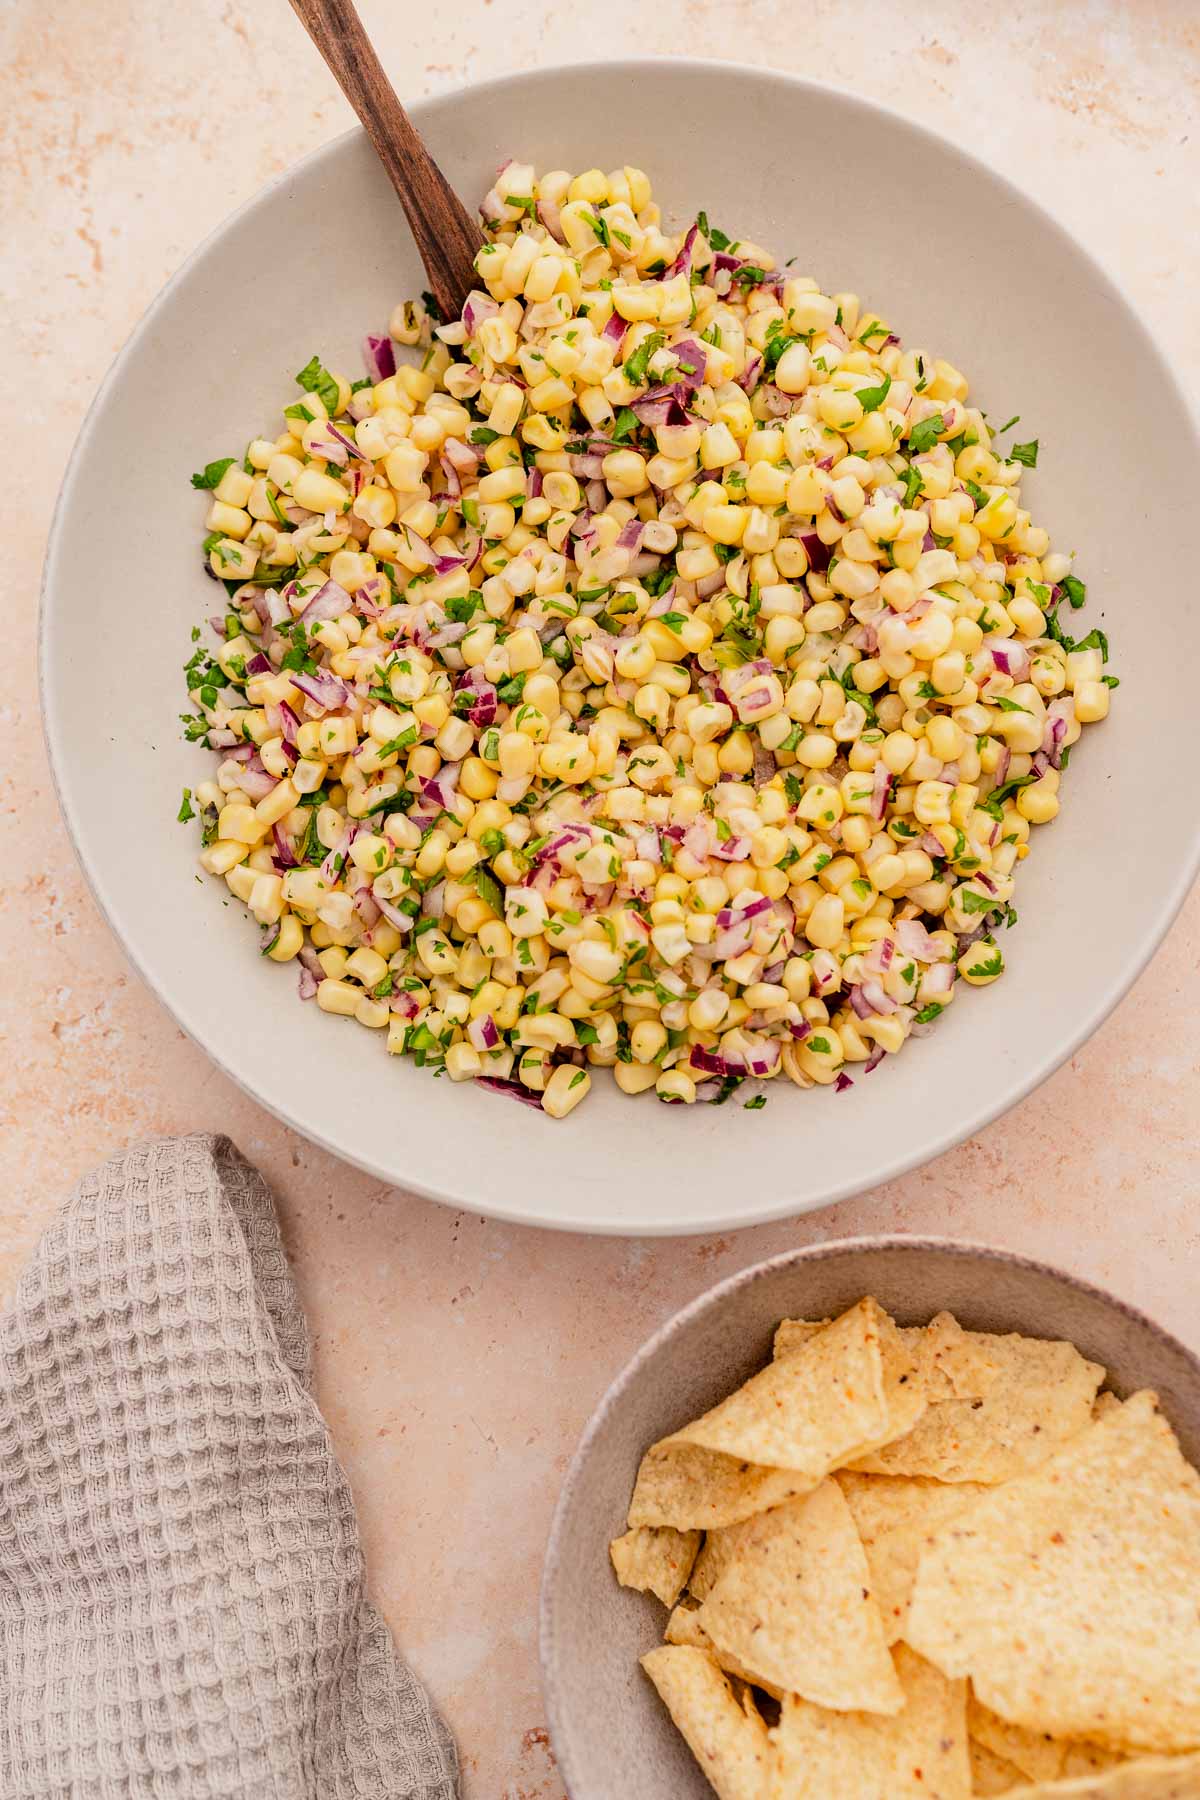 A bowl of chipotle corn salad with tortilla chips and a wooden spoon.